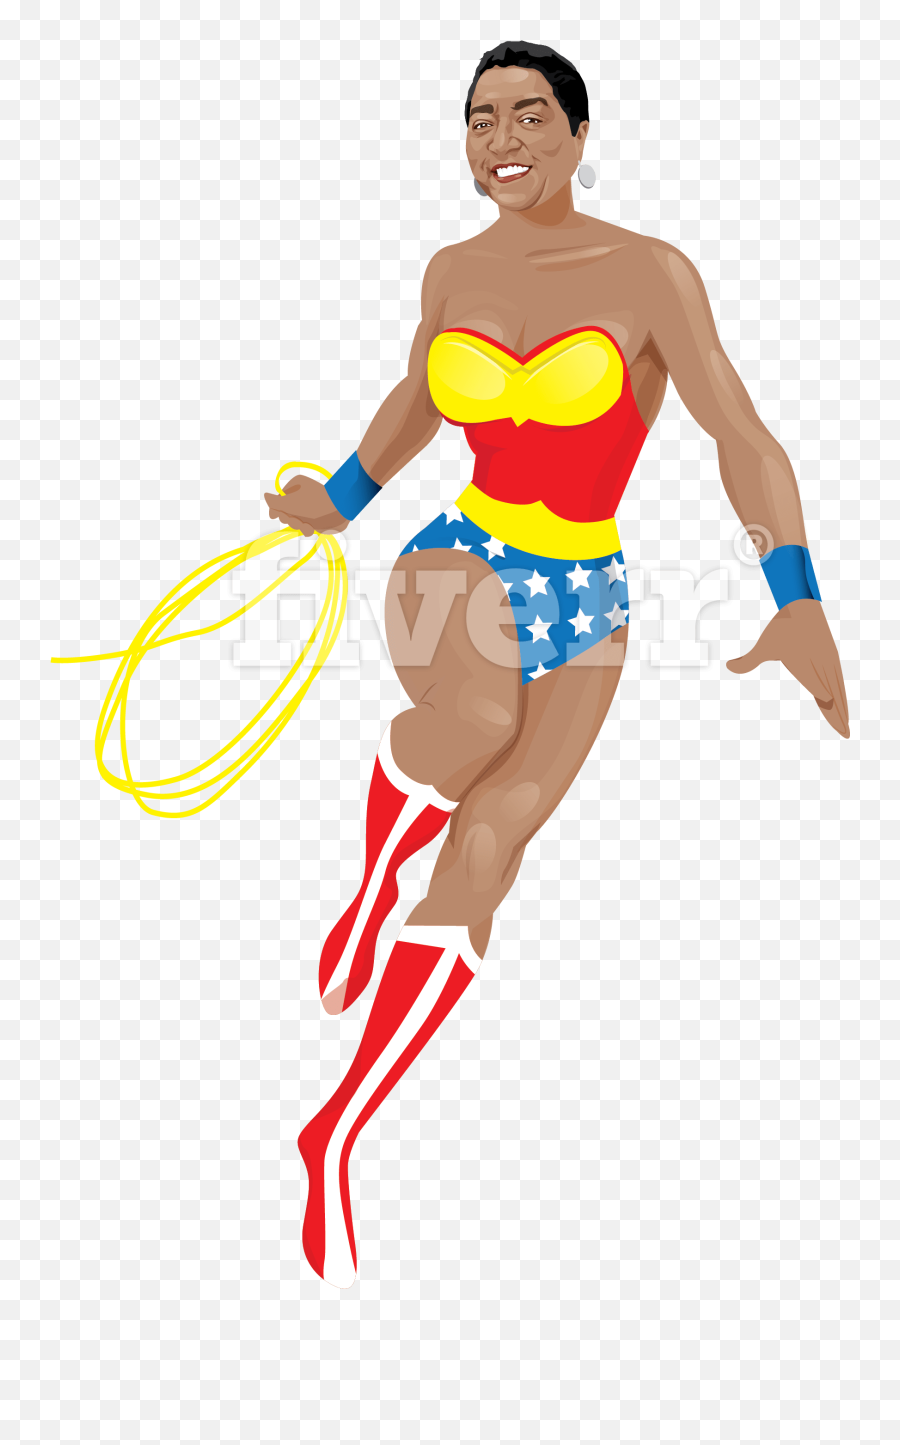 Download Wonder Woman Png Image With No Background - Pngkeycom Clip Art,Wonder Woman Png